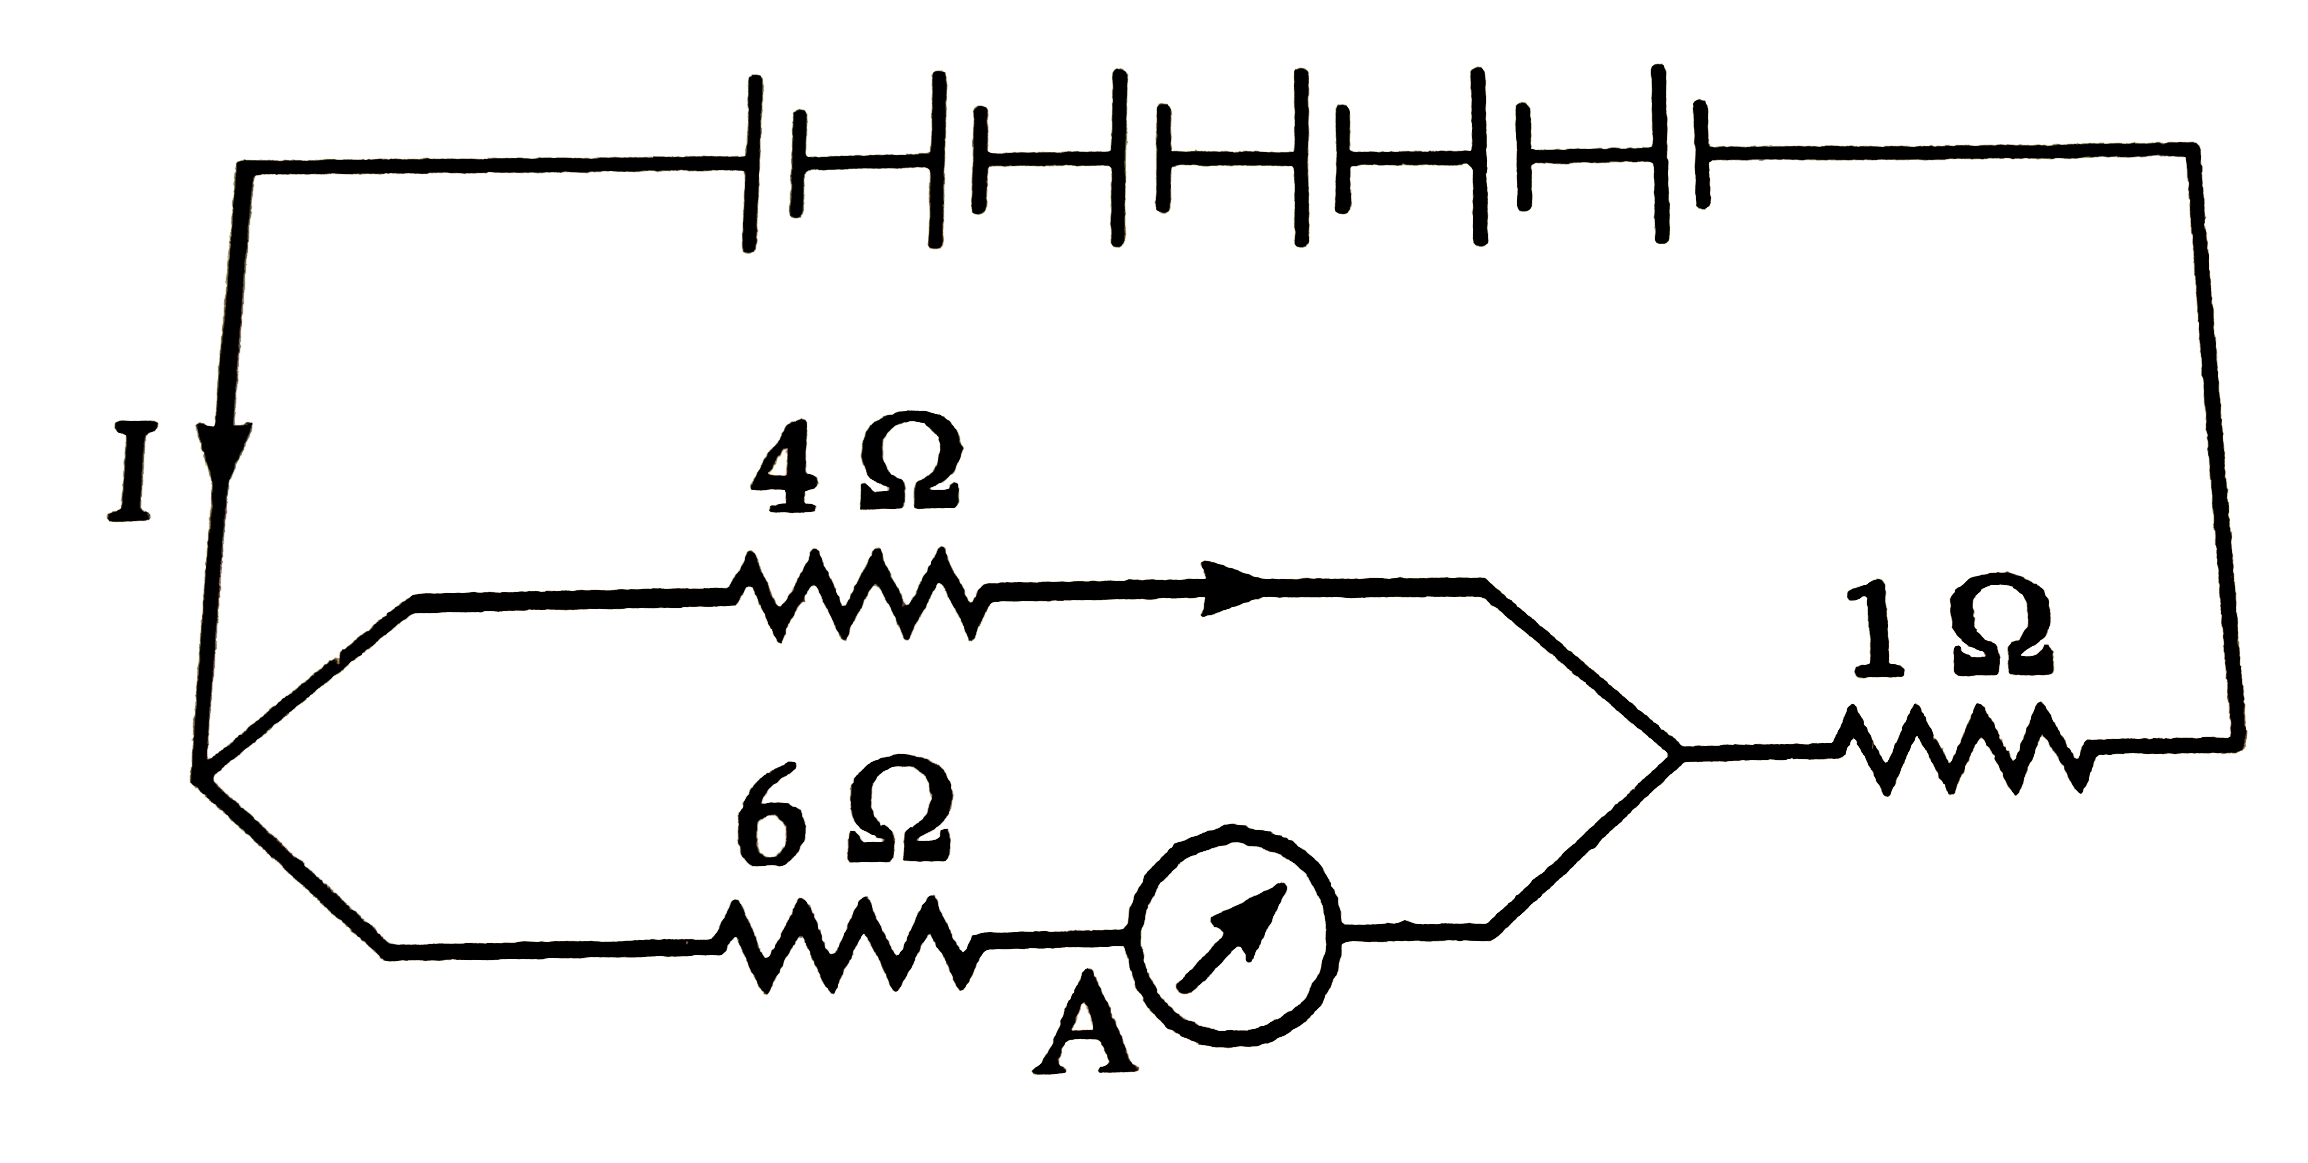 Six cells each of e.m.f. 2 V and internal resistance 0.1Omega are connected to three resistances as shown in figure. The reading of a low resistance ammeter A in the circuit is,